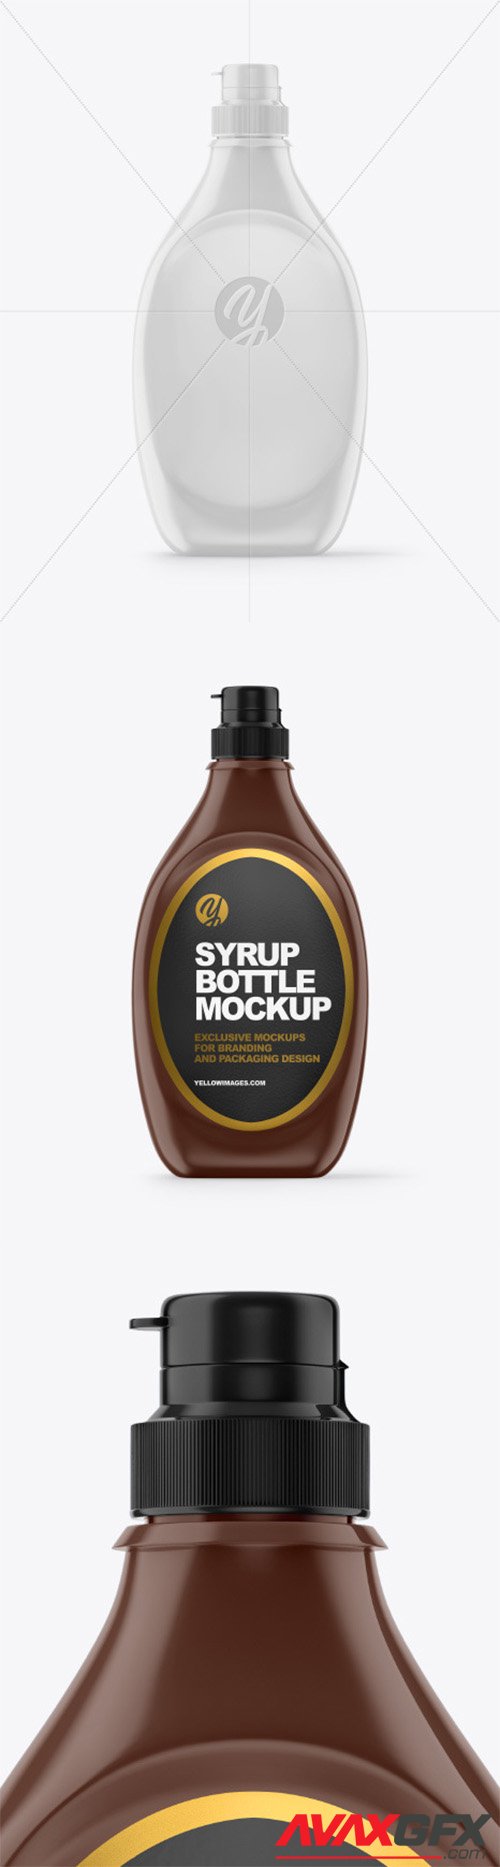 Download Glossy Plastic Syrup Bottle Mockup 61347 Avaxgfx All Downloads That You Need In One Place Graphic From Nitroflare Rapidgator PSD Mockup Templates